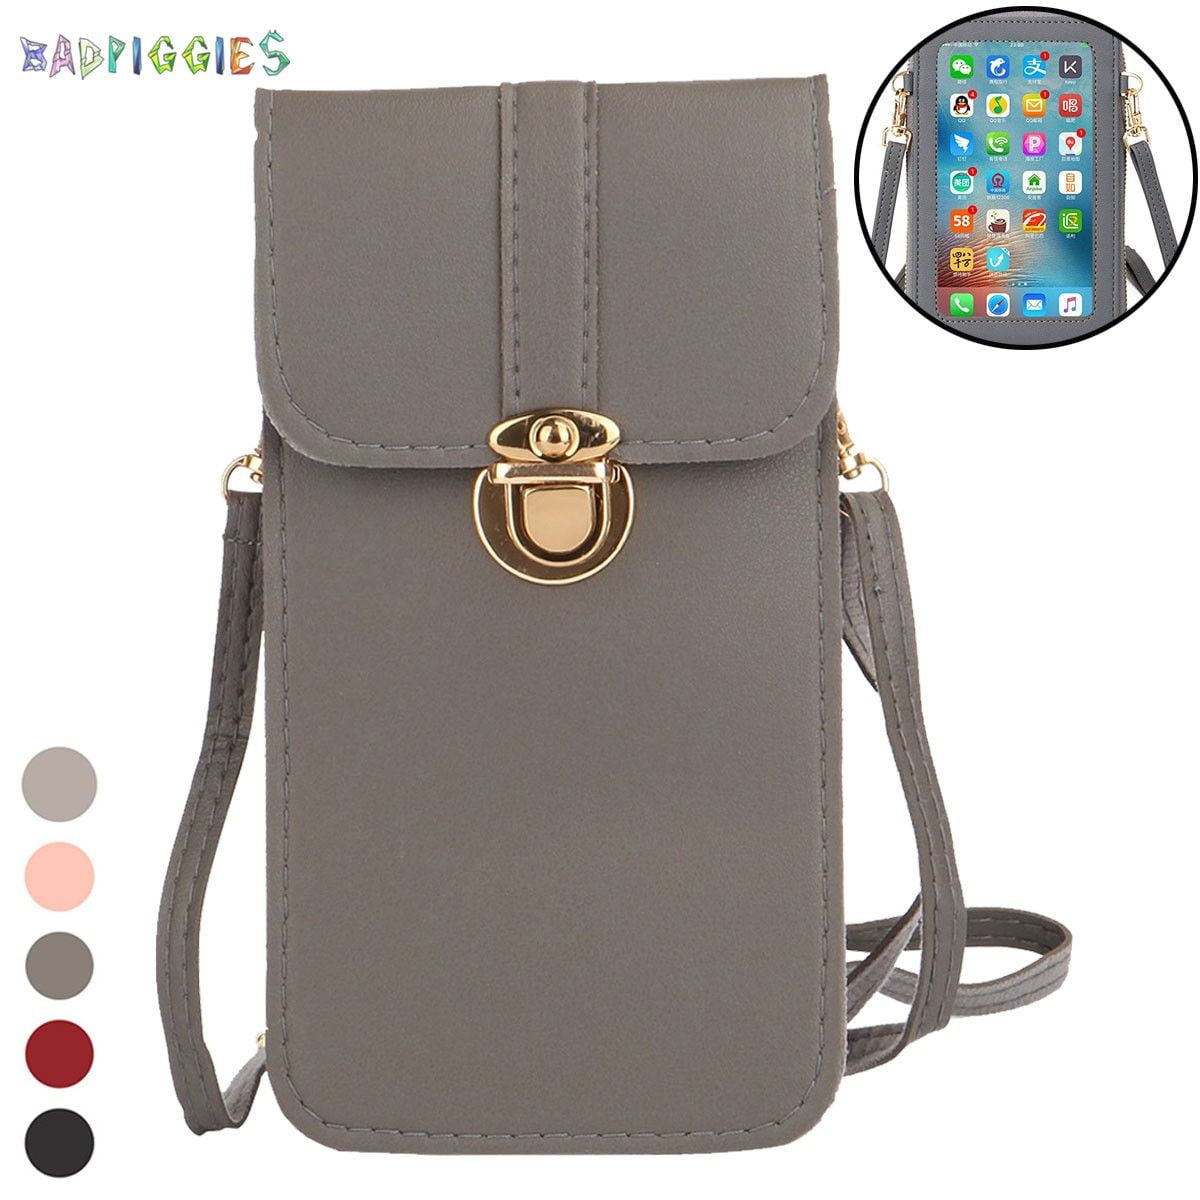 Gray） Lightweight Leather Cell Phone Wallet Purse Touch Screen Bag Crossbody Bags for Women Girls 